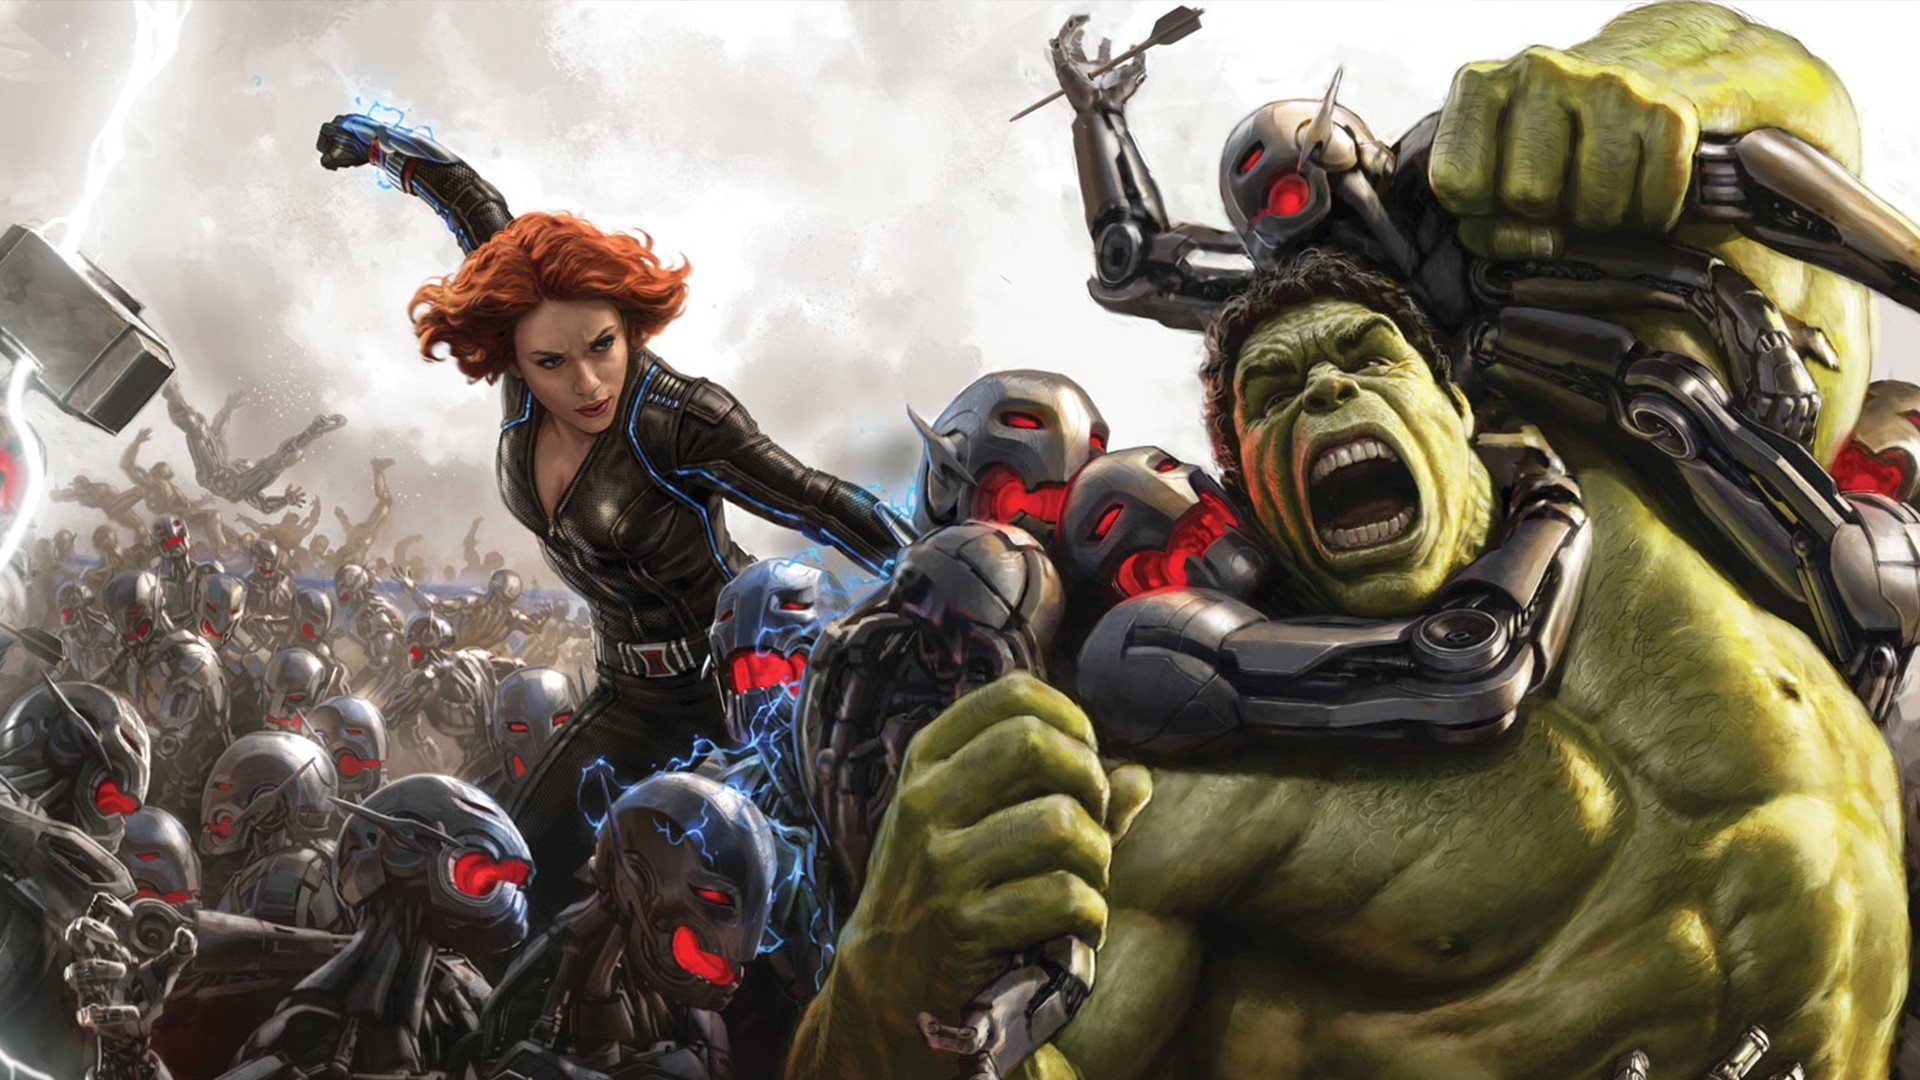 download avengers age of ultron free online